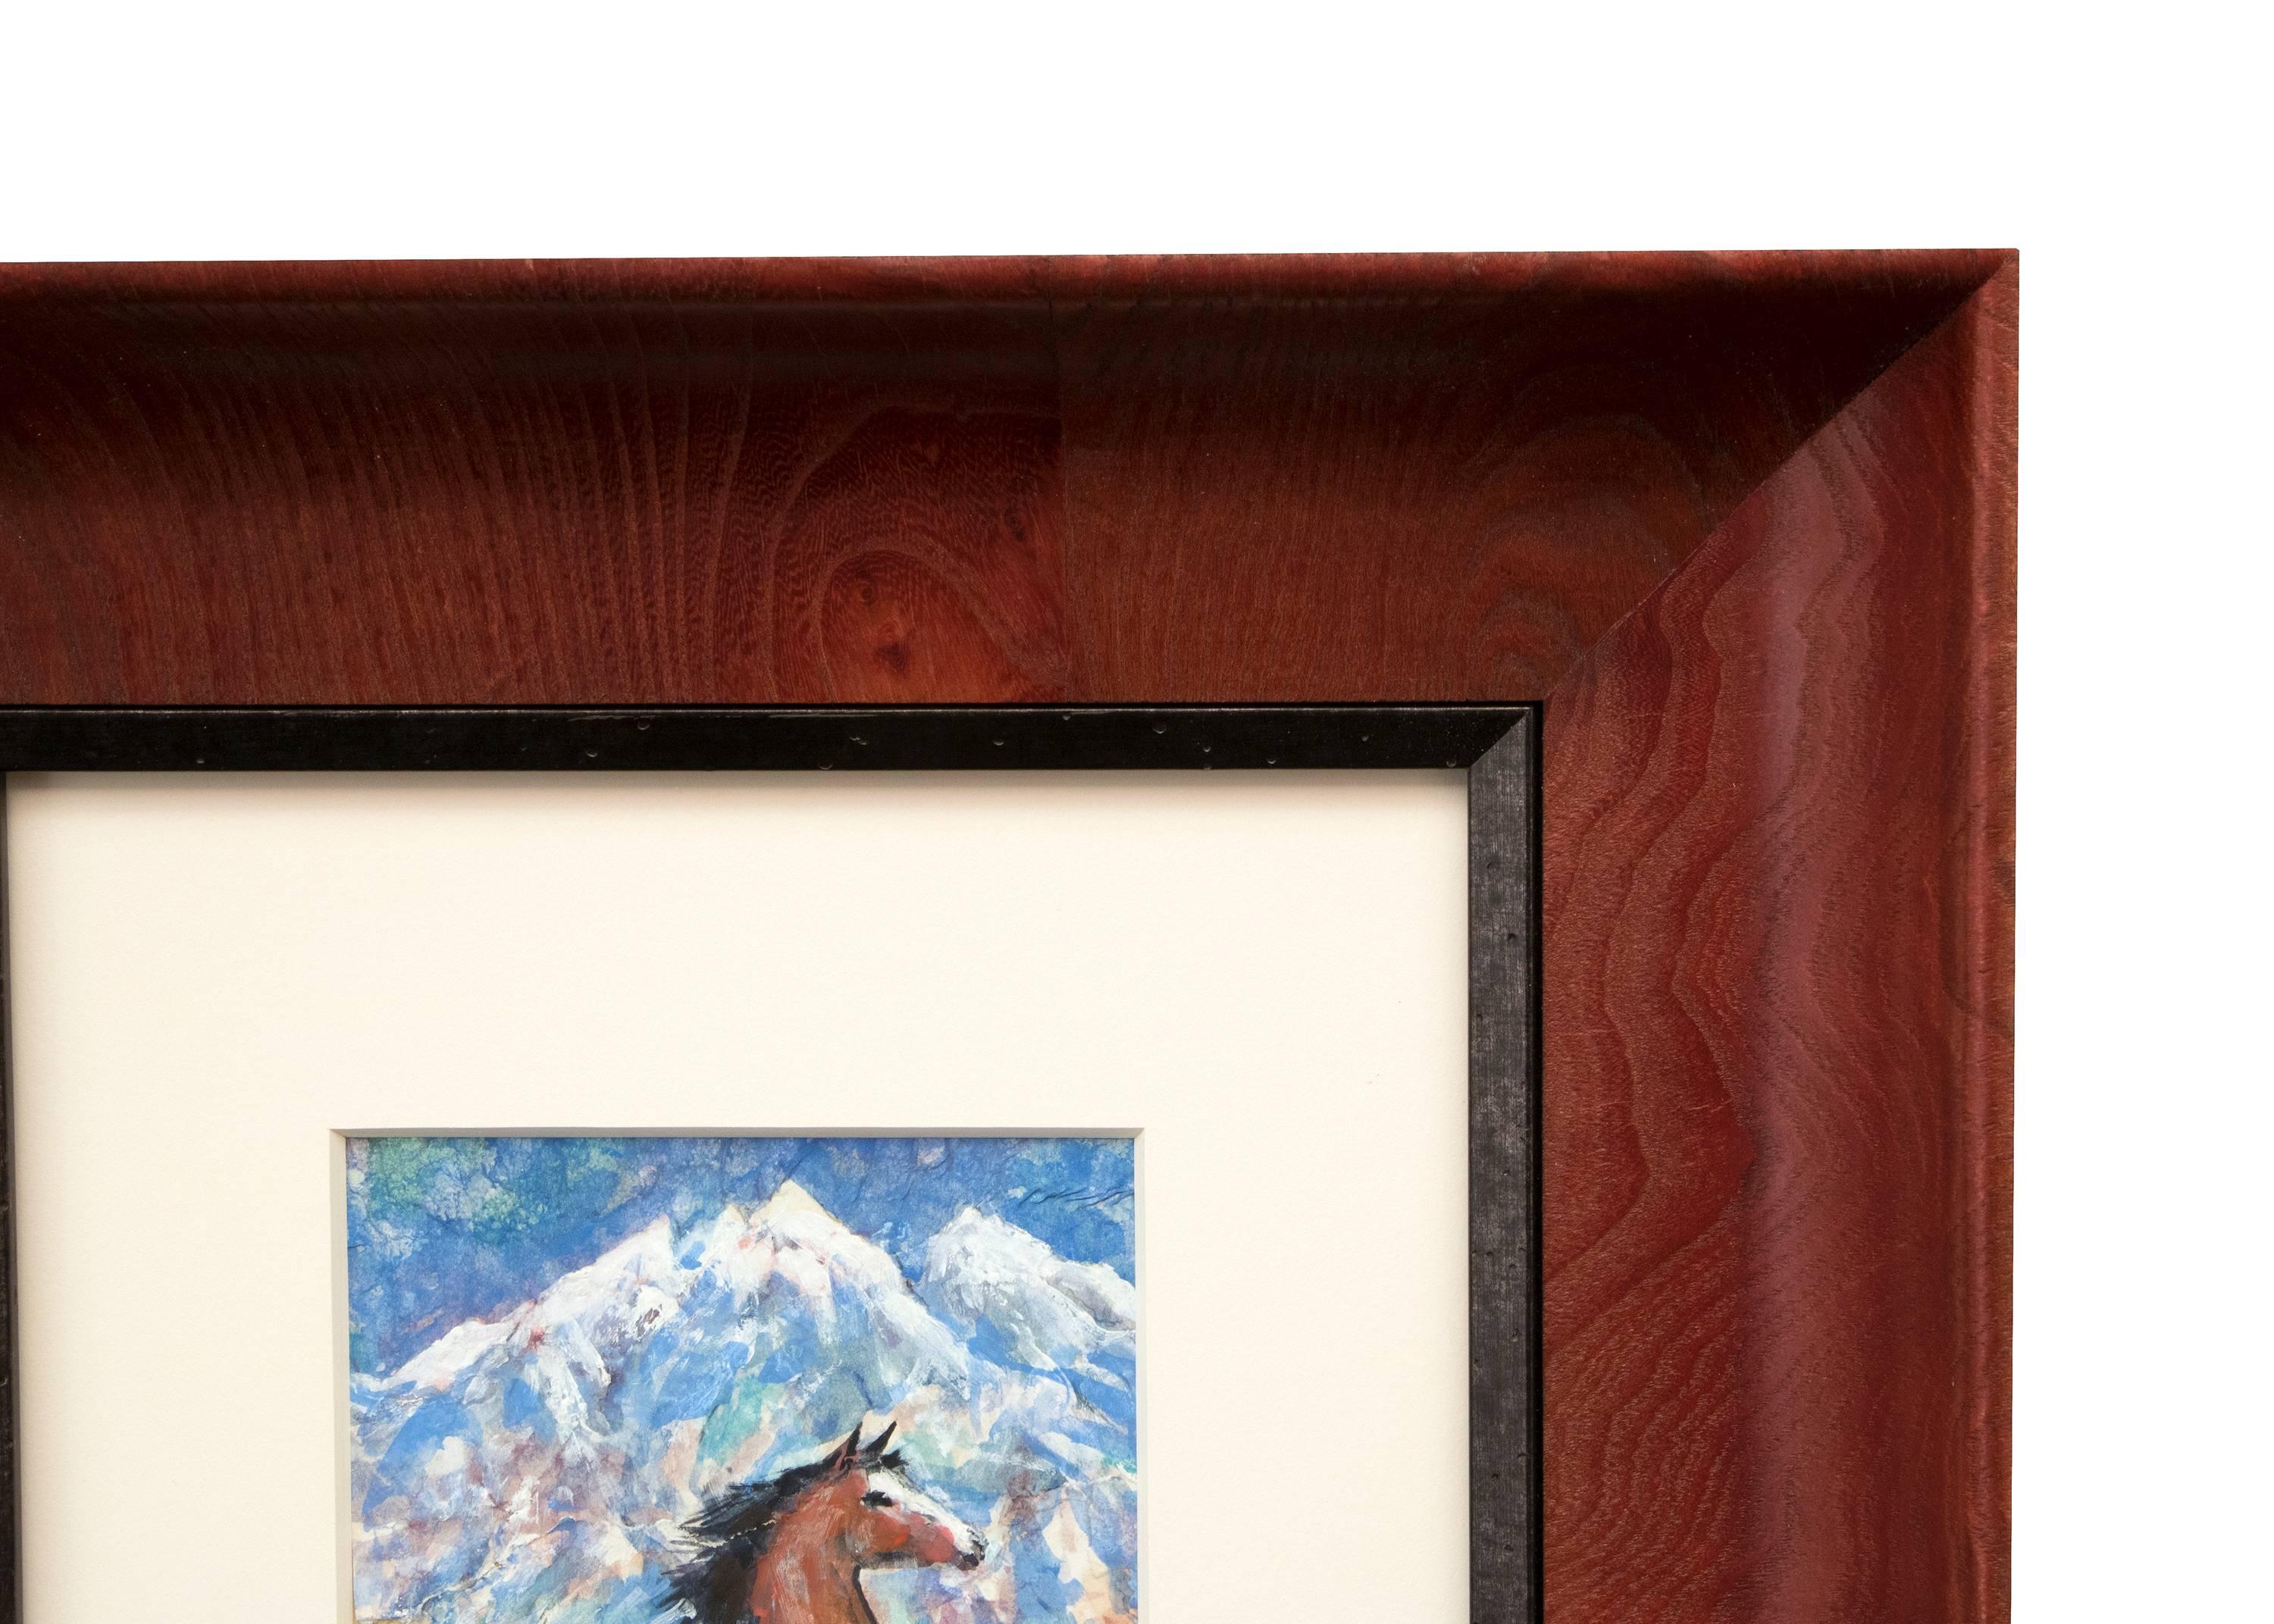 Untitled (Horse and Mountain) - American Modern Painting by Ila Mae McAfee